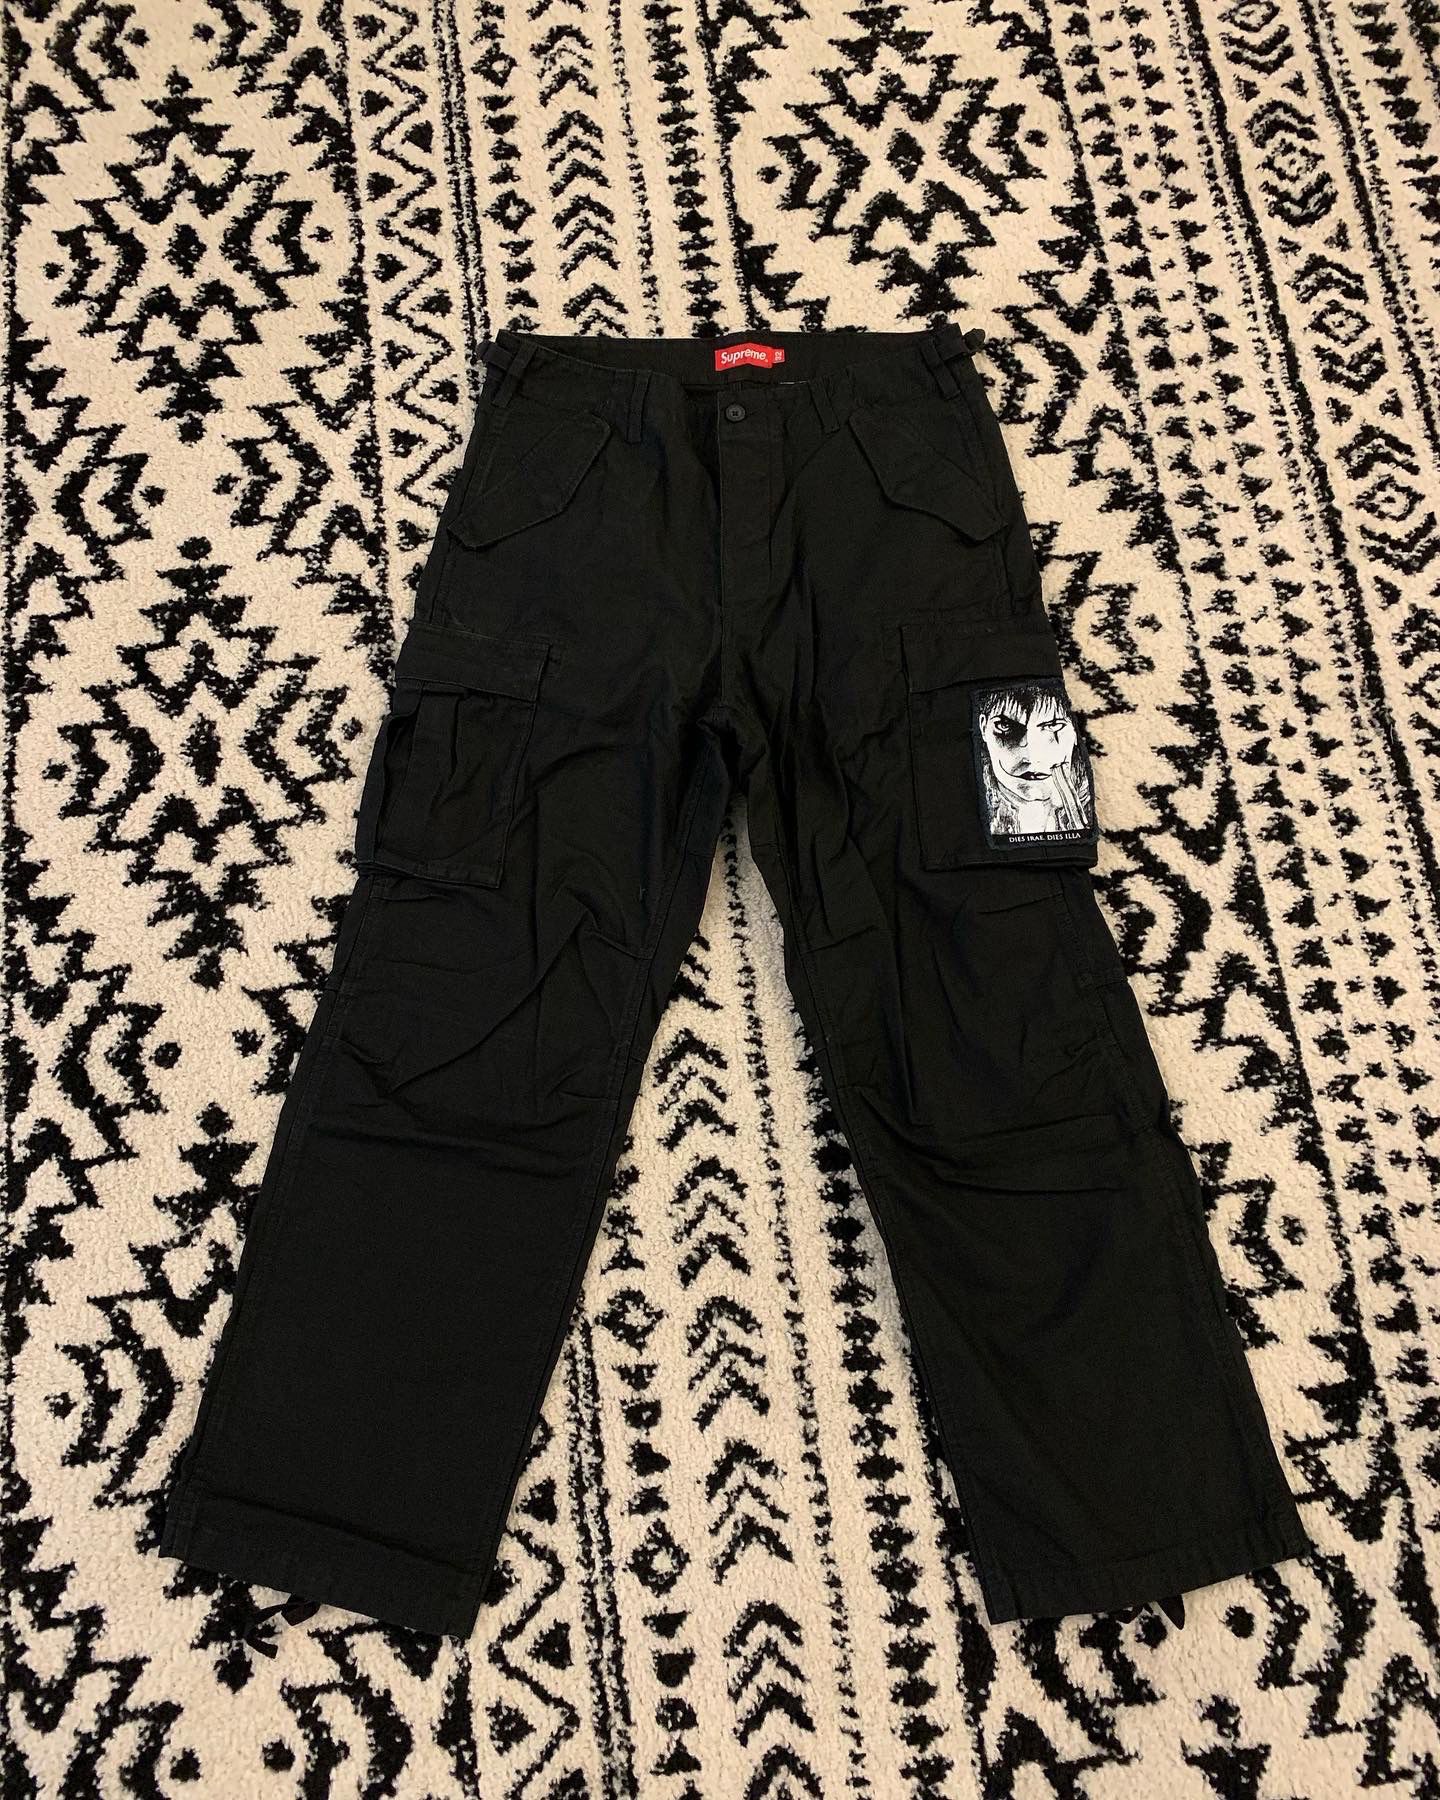 Supreme x The Crow Cargo Pants size 30 for Sale in Katy, TX - OfferUp